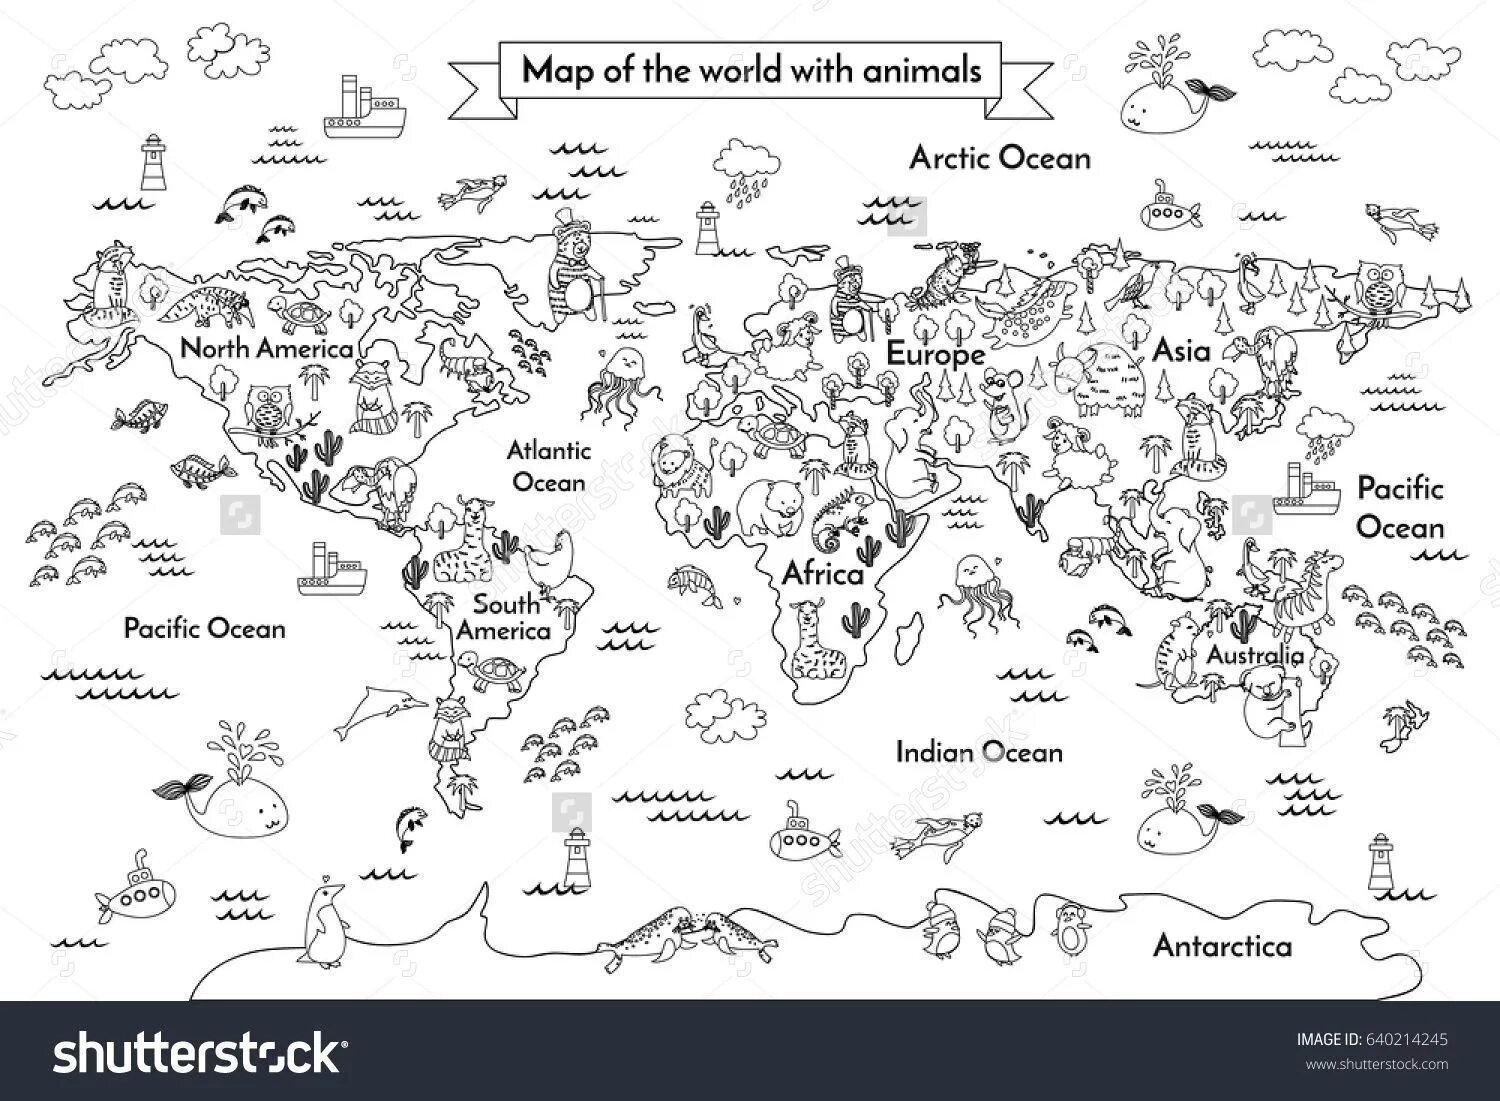 Large giant map of the world